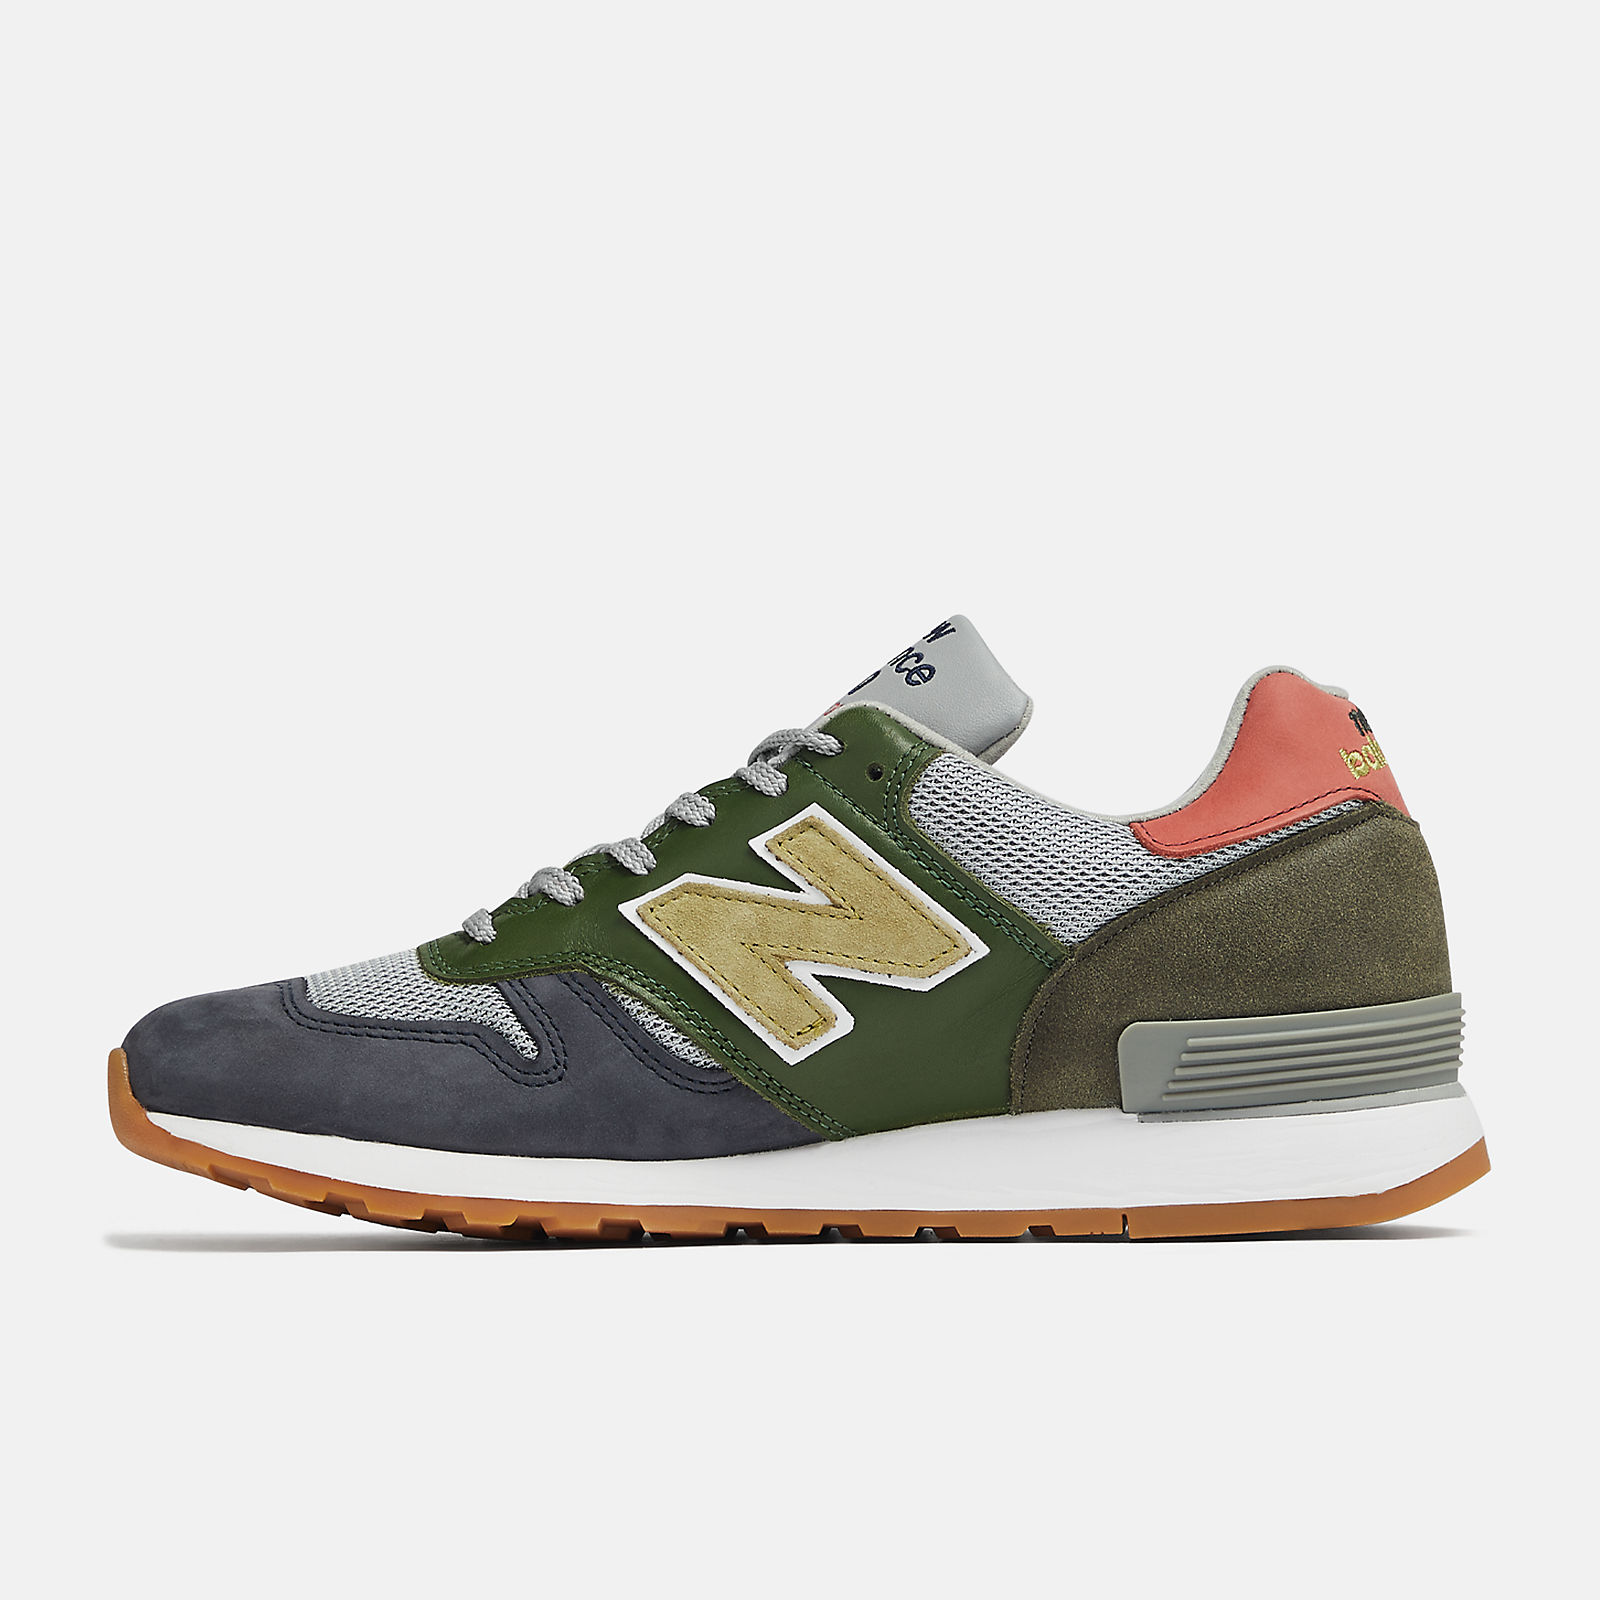 New balance 670 selected edition made in uk the sims 2 university